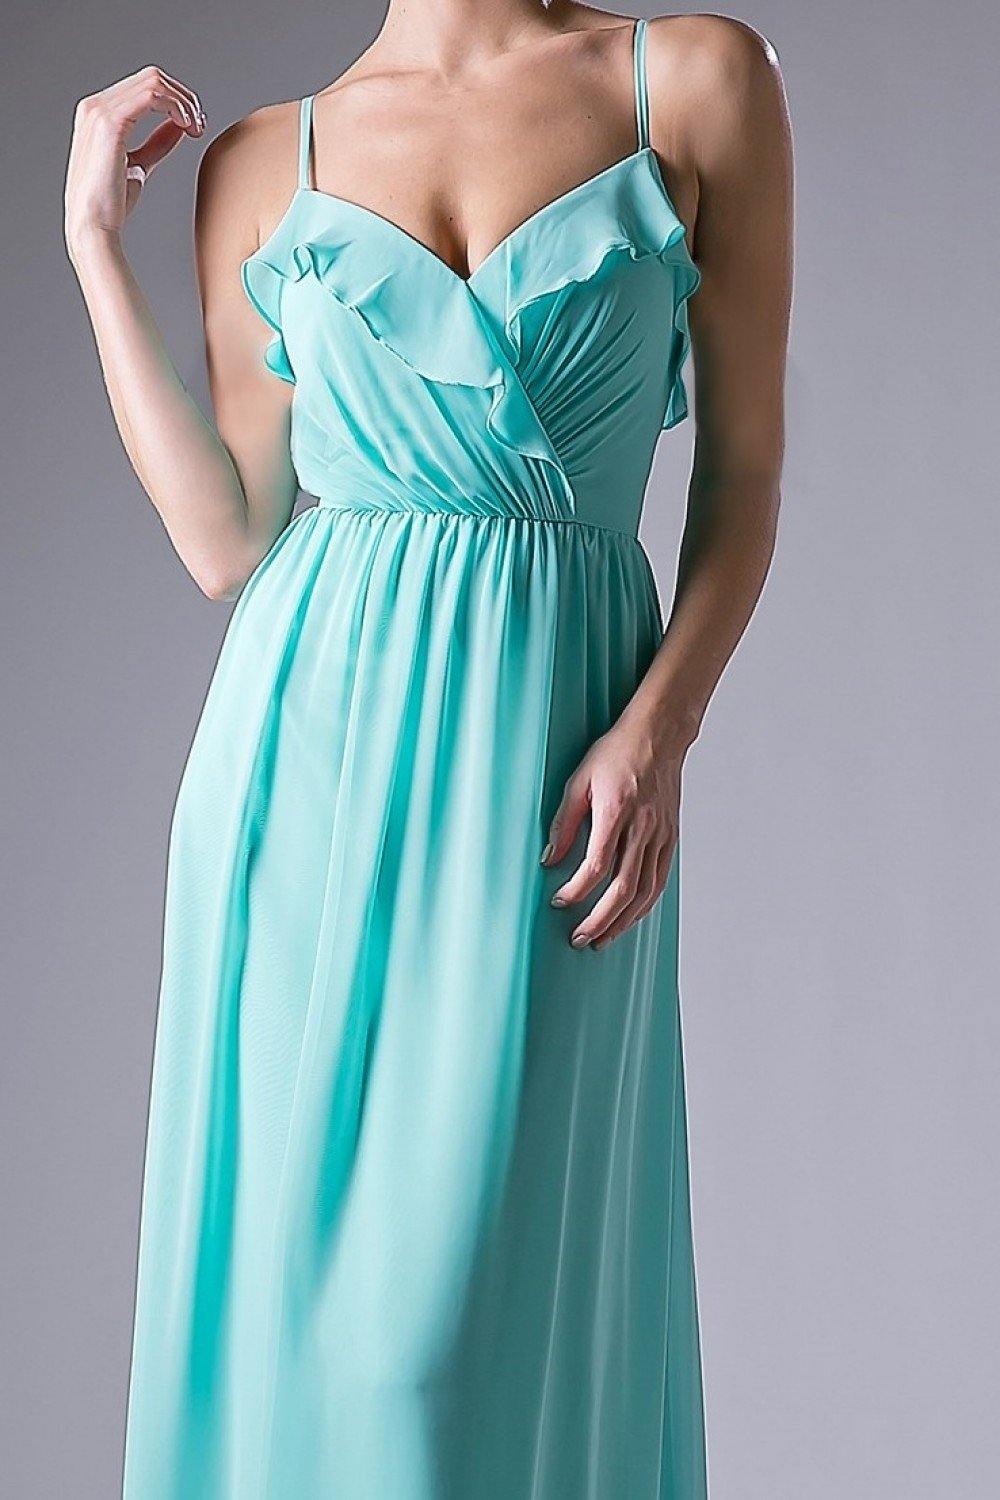 Formal Long Dress Bridesmaid - The Dress Outlet